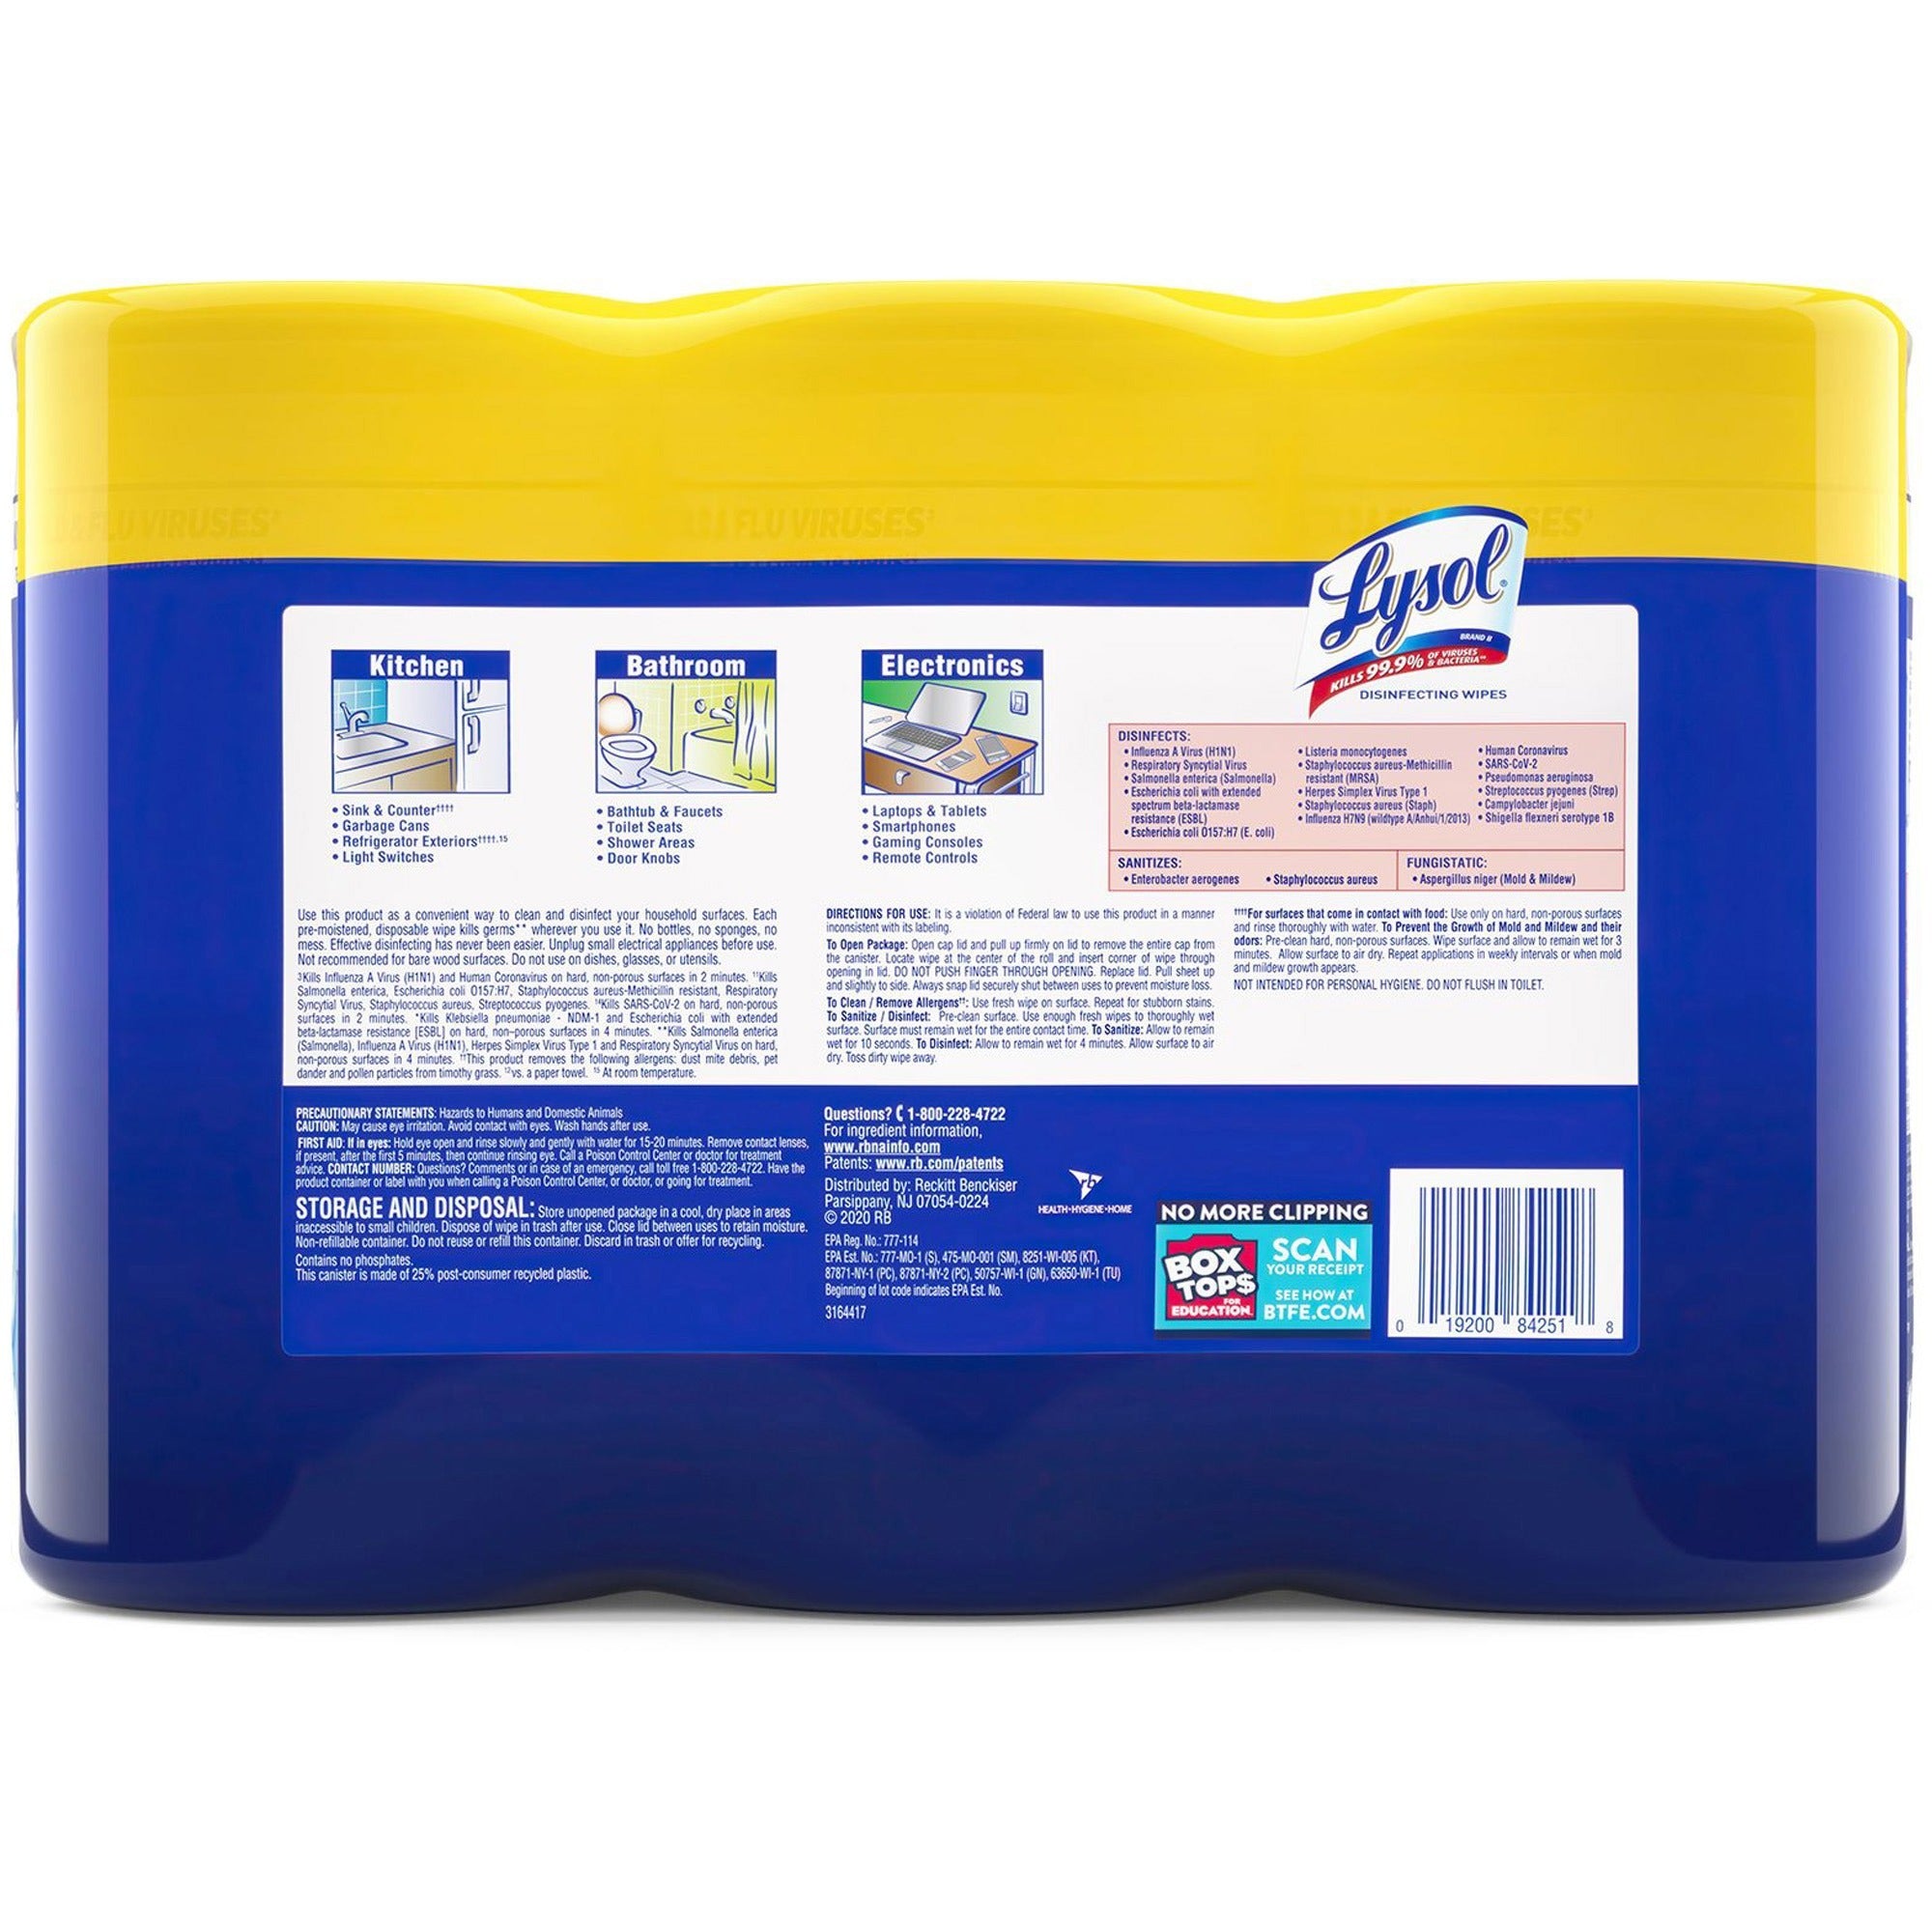 Disinfecting Wipes, 7 x 8, Lemon and Lime Blossom, 80/Canister, 3/Pack, Sold as 1 Package - 2